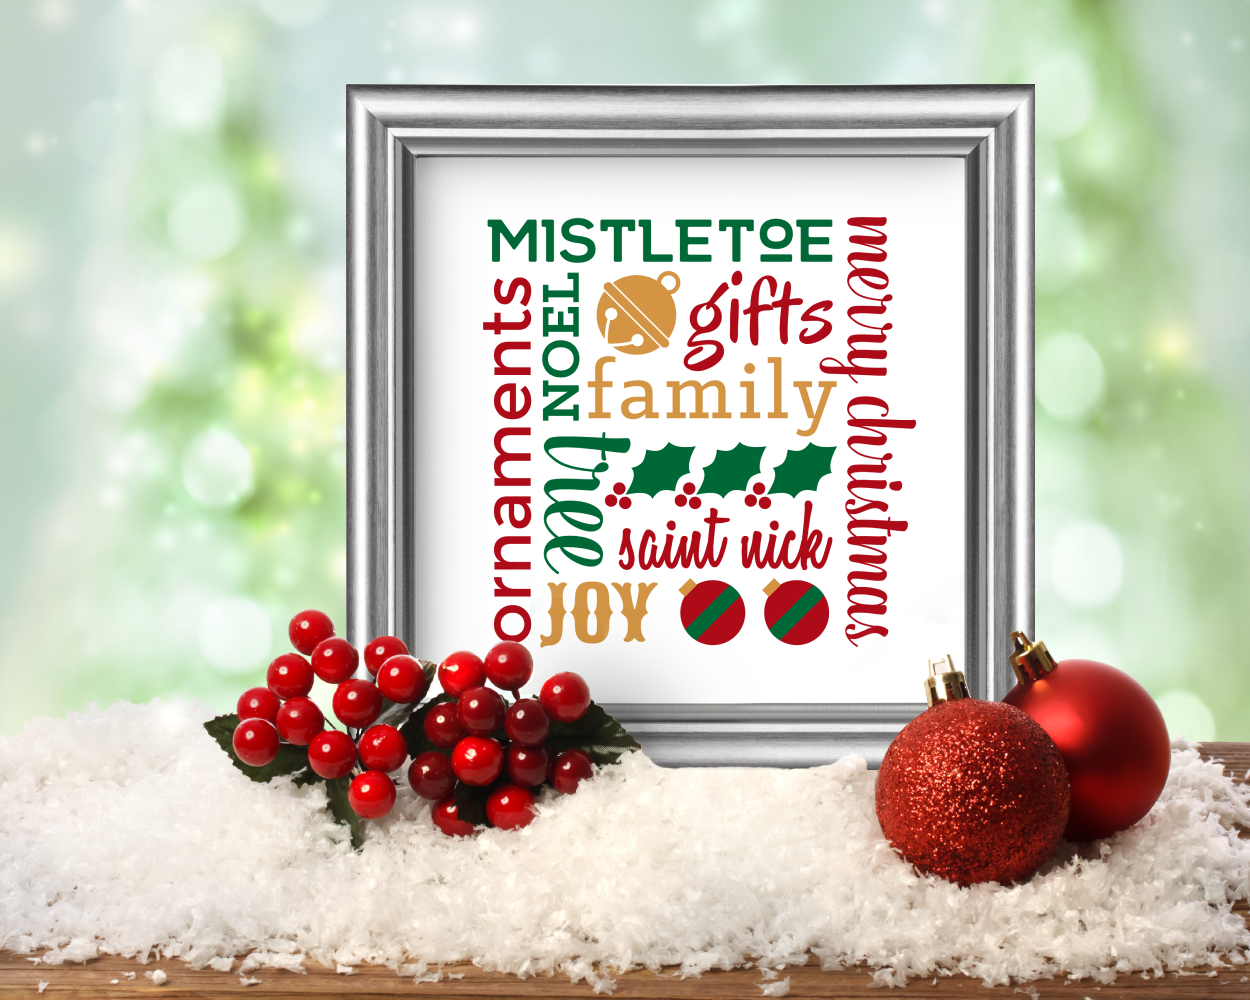 A square framed poster sits on a table with fake snow under it, holly berries, and red Christmas ornaments. The poster has various Christmas words and symbols set on a square in red, green and gold on a white background.